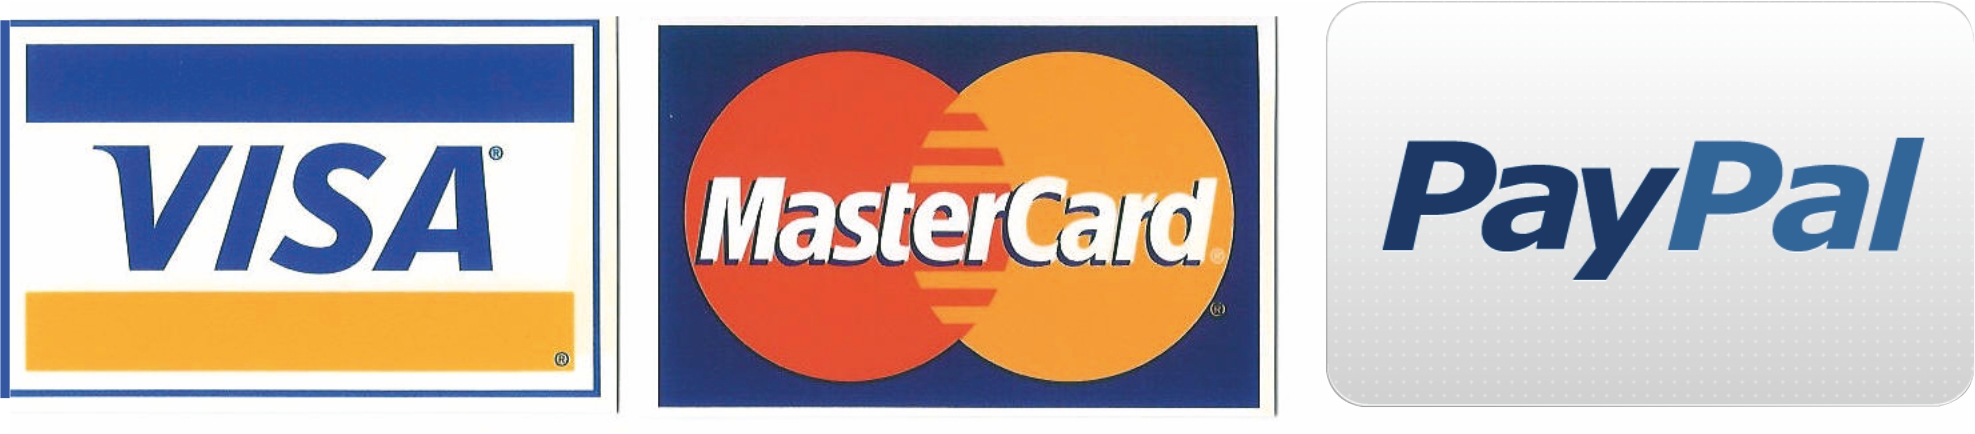 major credit cards accepted. All major credit cards